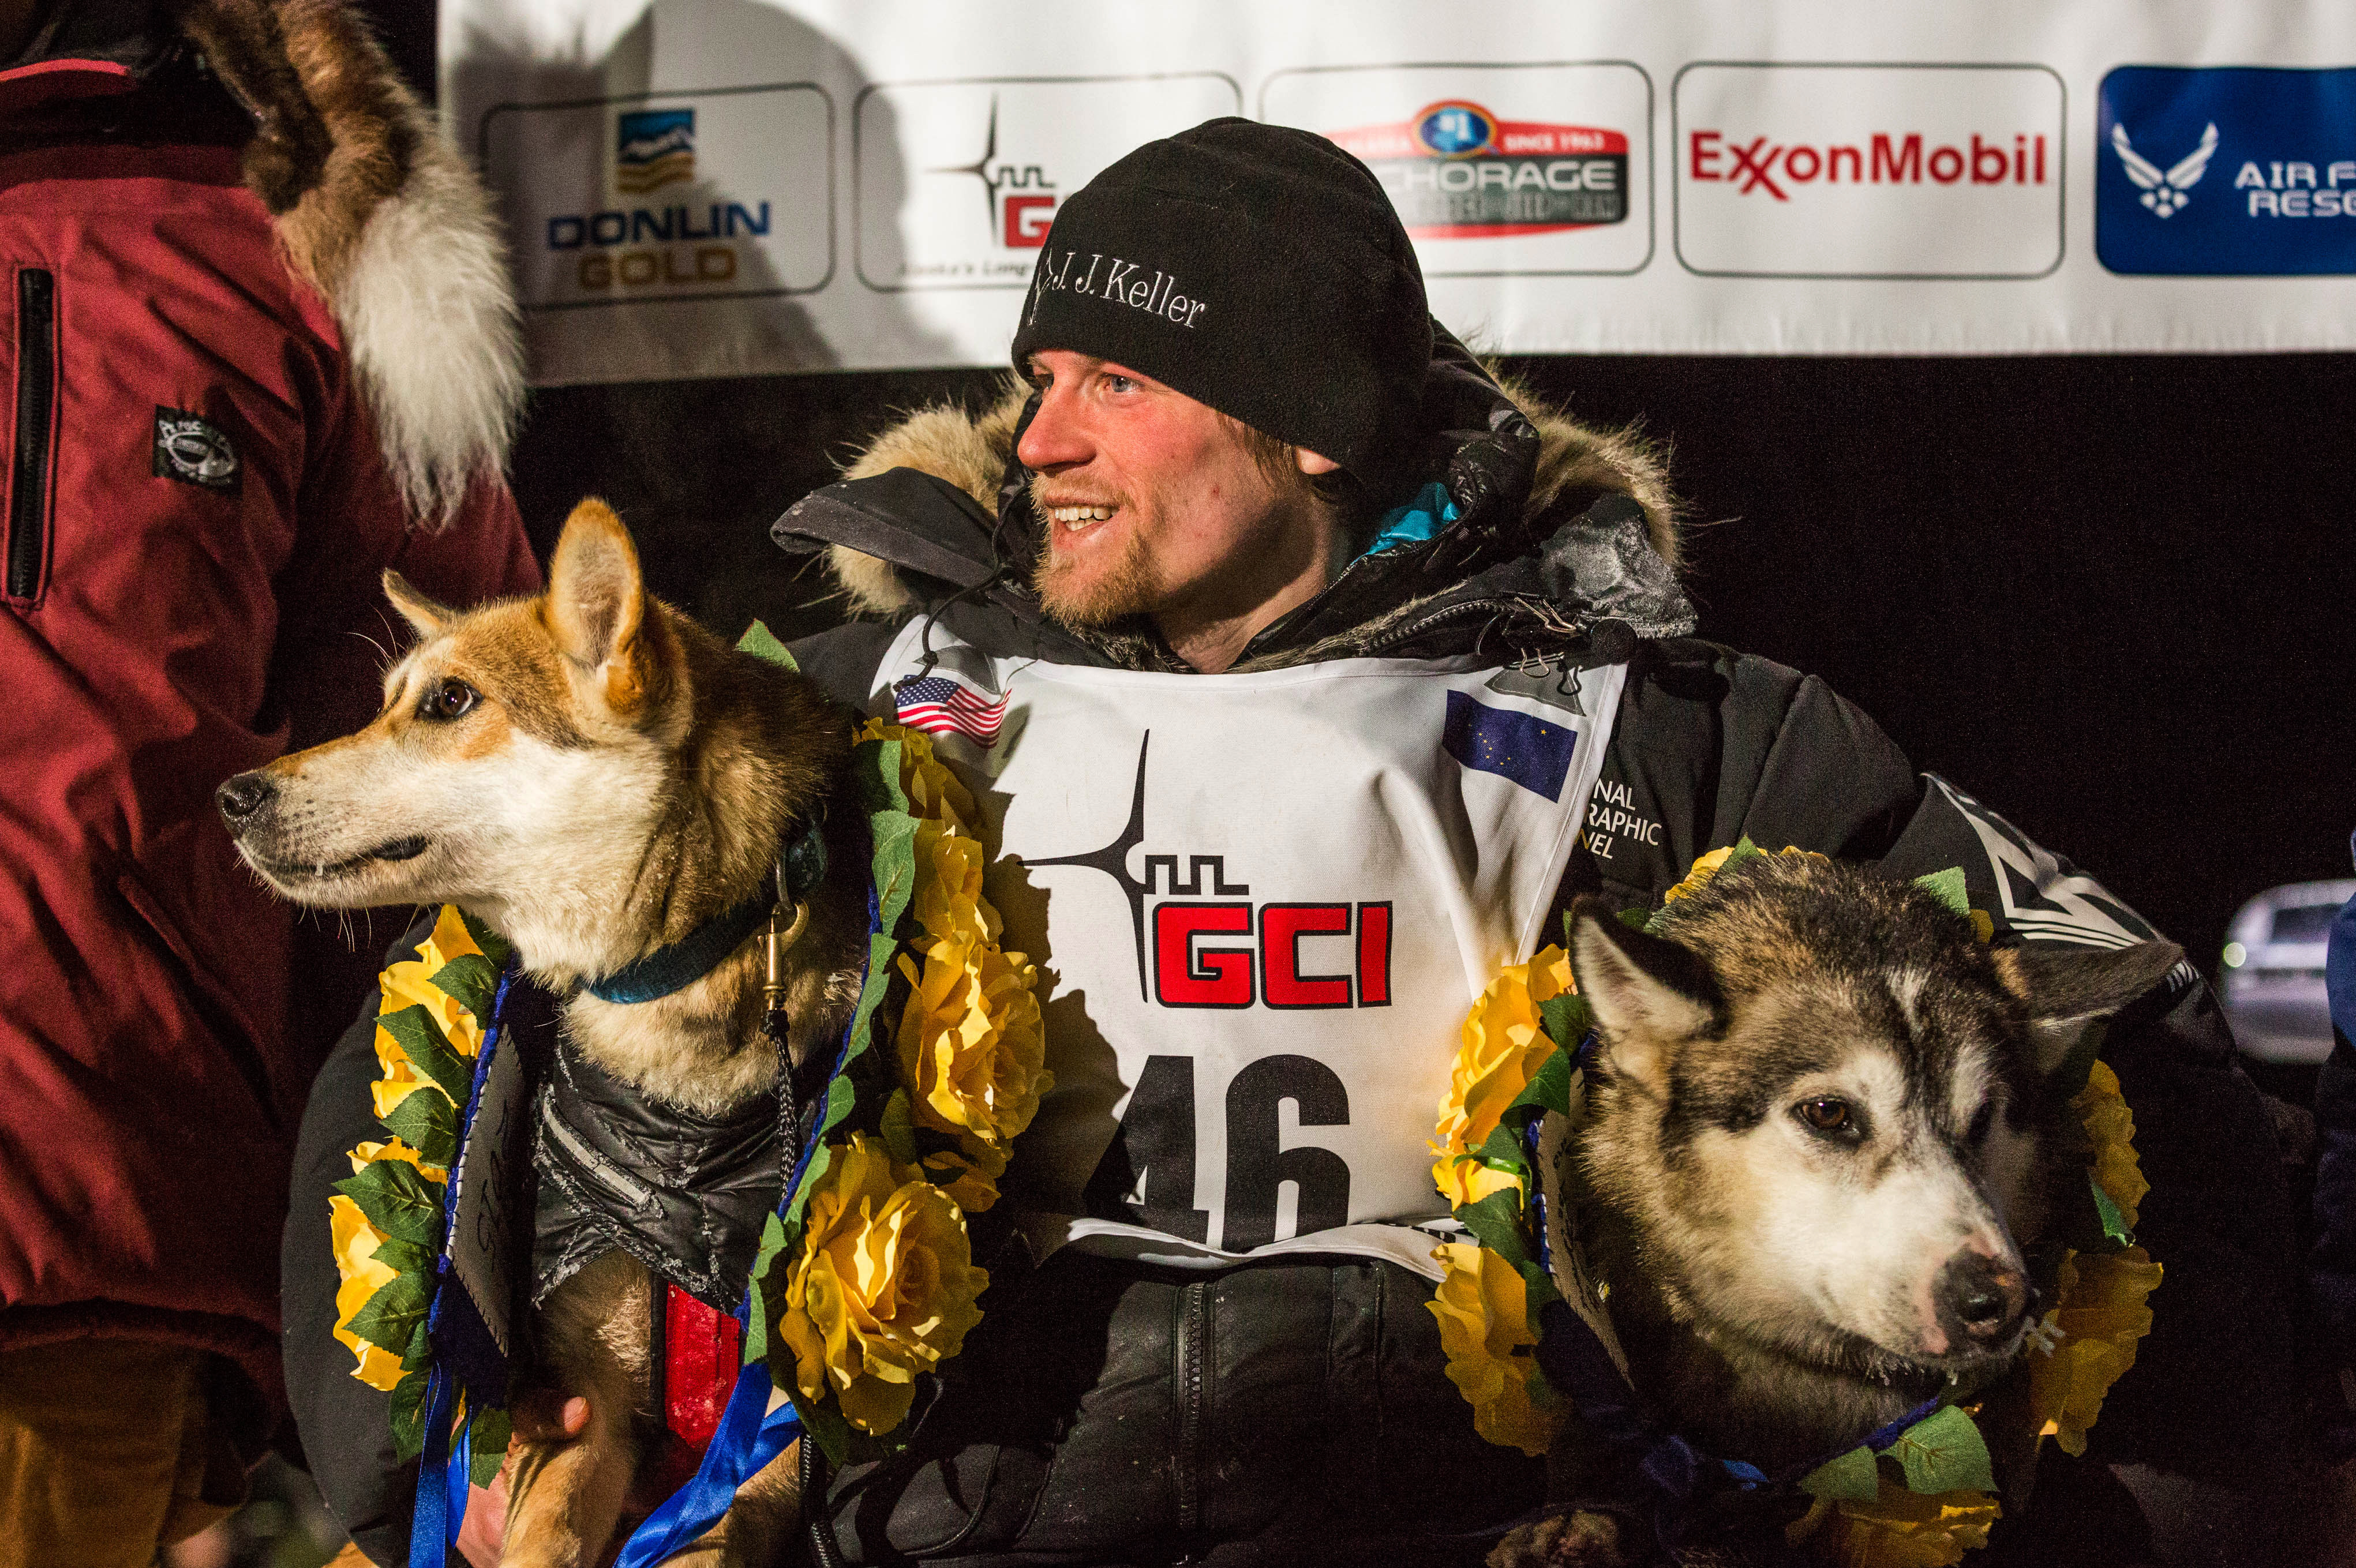 Dallas Seavey wins Iditarod in year marked by uncertainty The